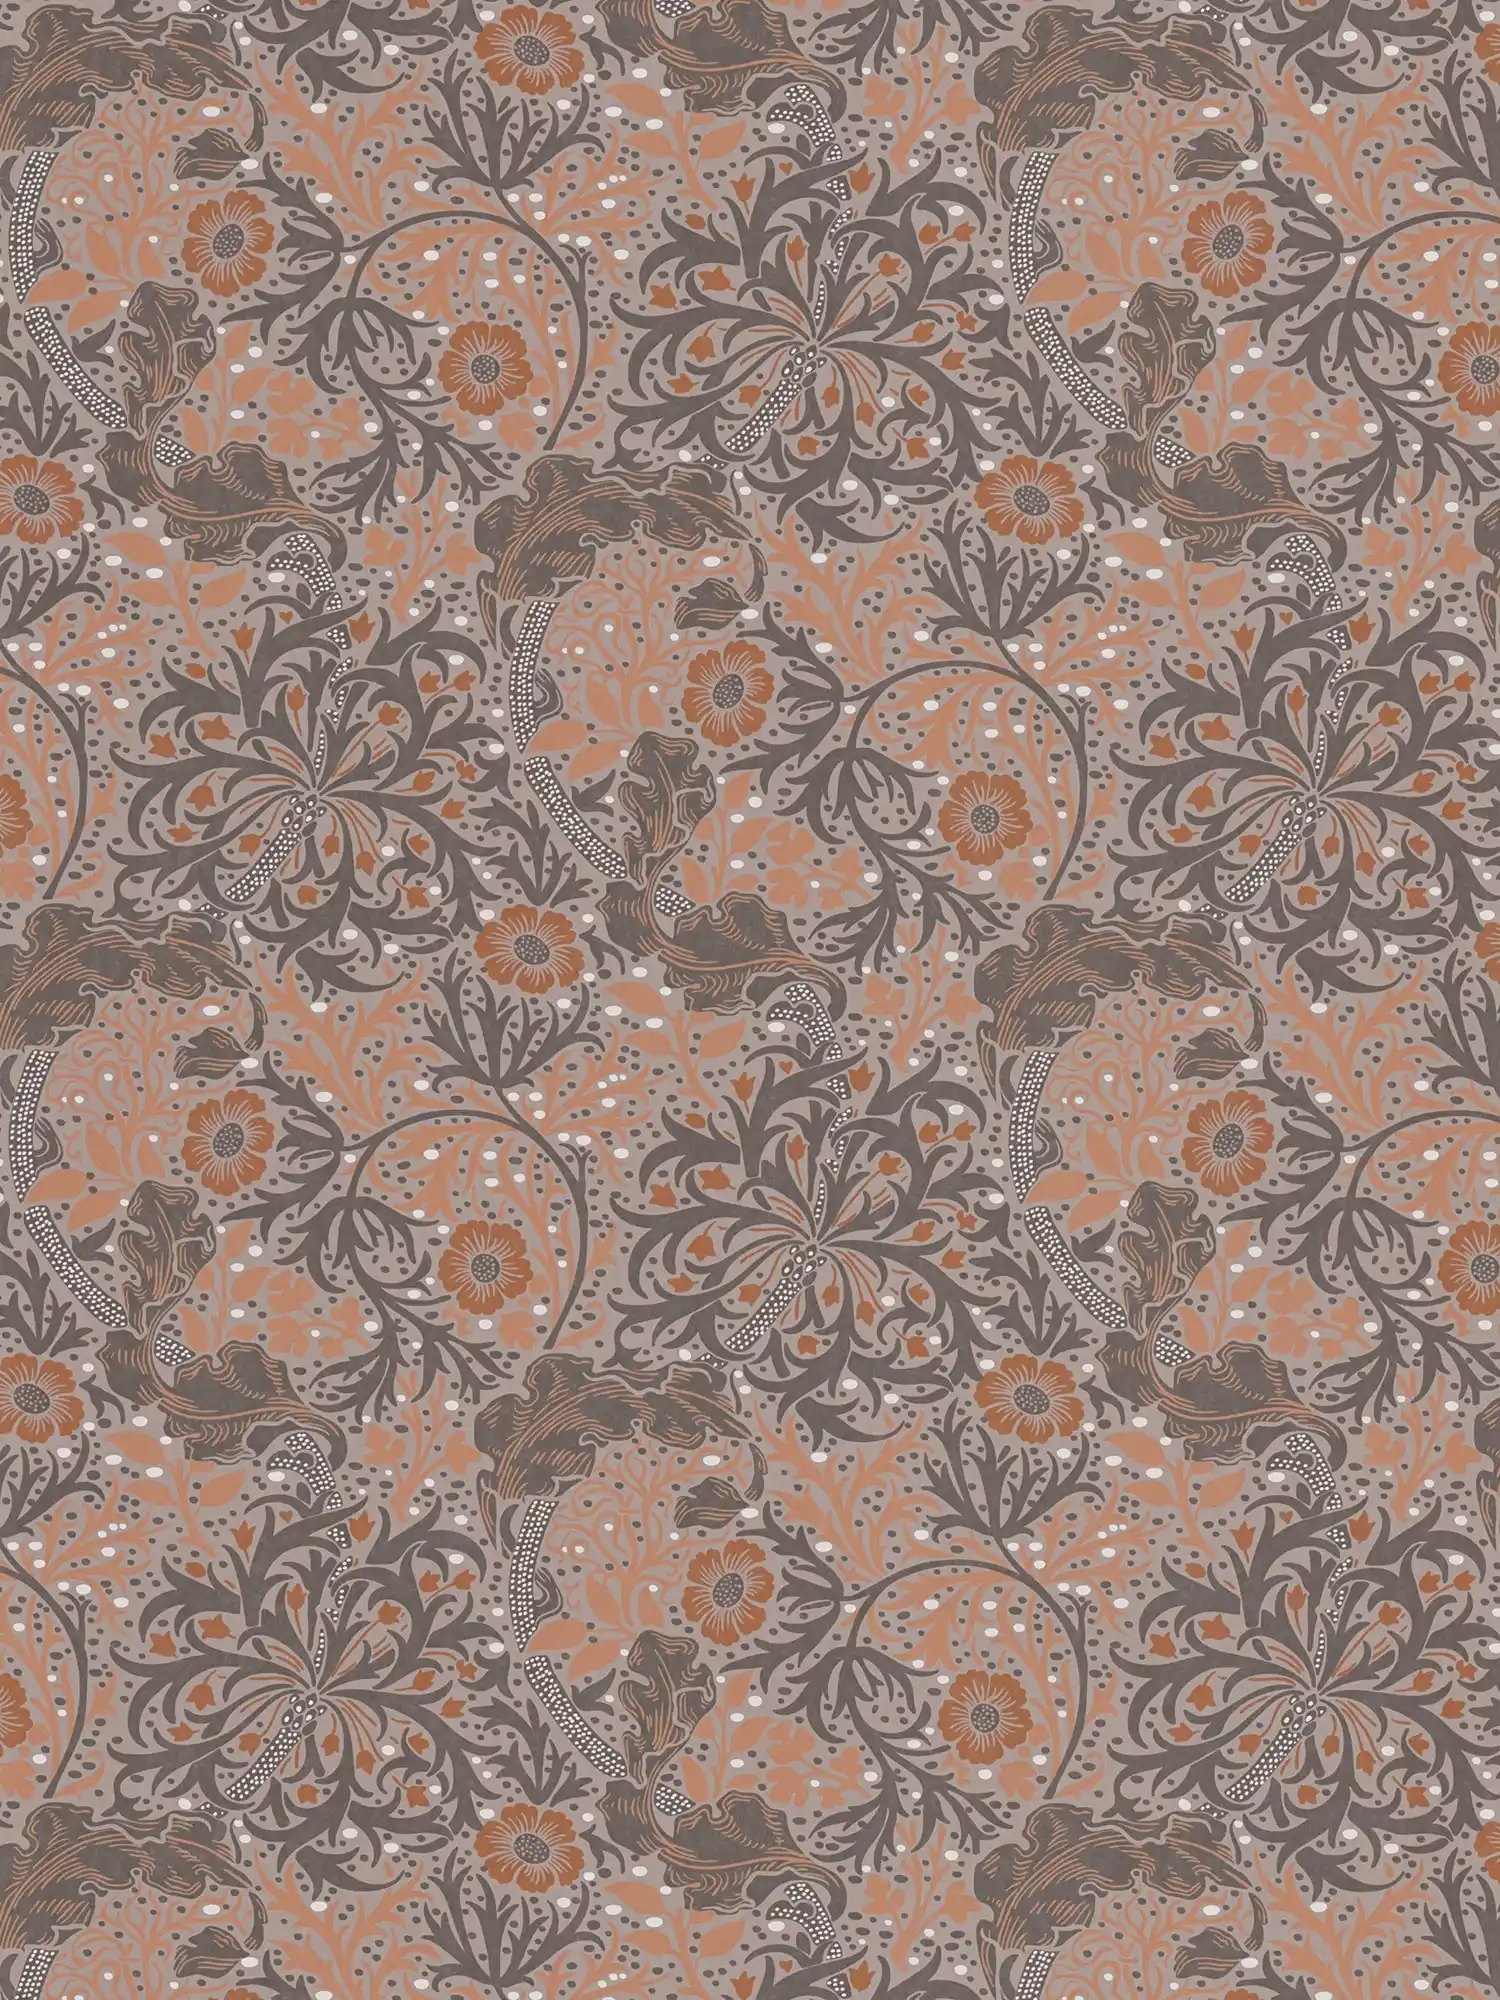 Wallpaper with flowers and vines floral & dotted - orange, grey, black
